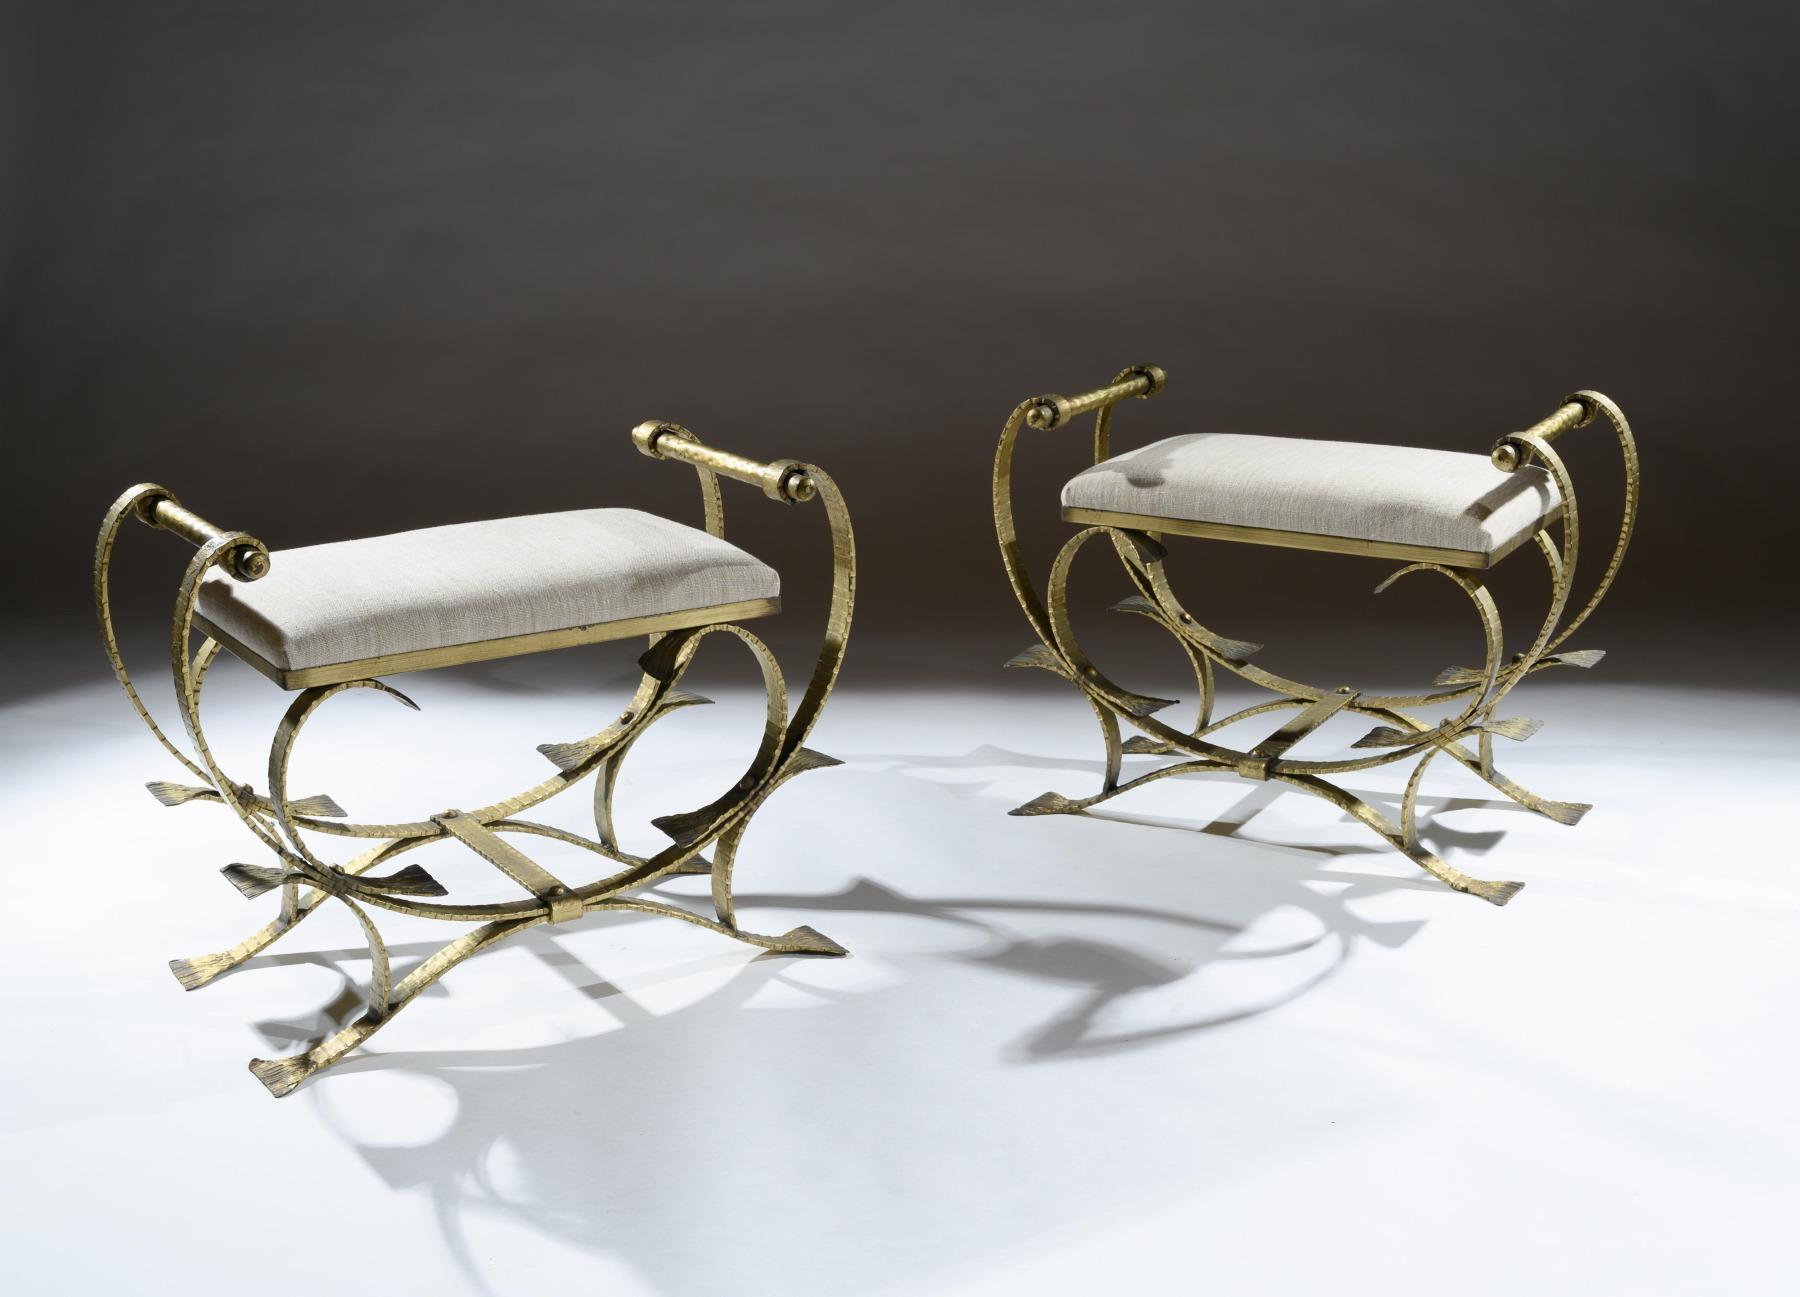 A unusual pair of Mid-Century Modern Spanish gilt metal and linen upholstered stools / window seats.

Spanish, circa 1950.

Very stylish, having ornate contemporary scroll work gilt iron frames and newly linen upholstered seats. These decorative